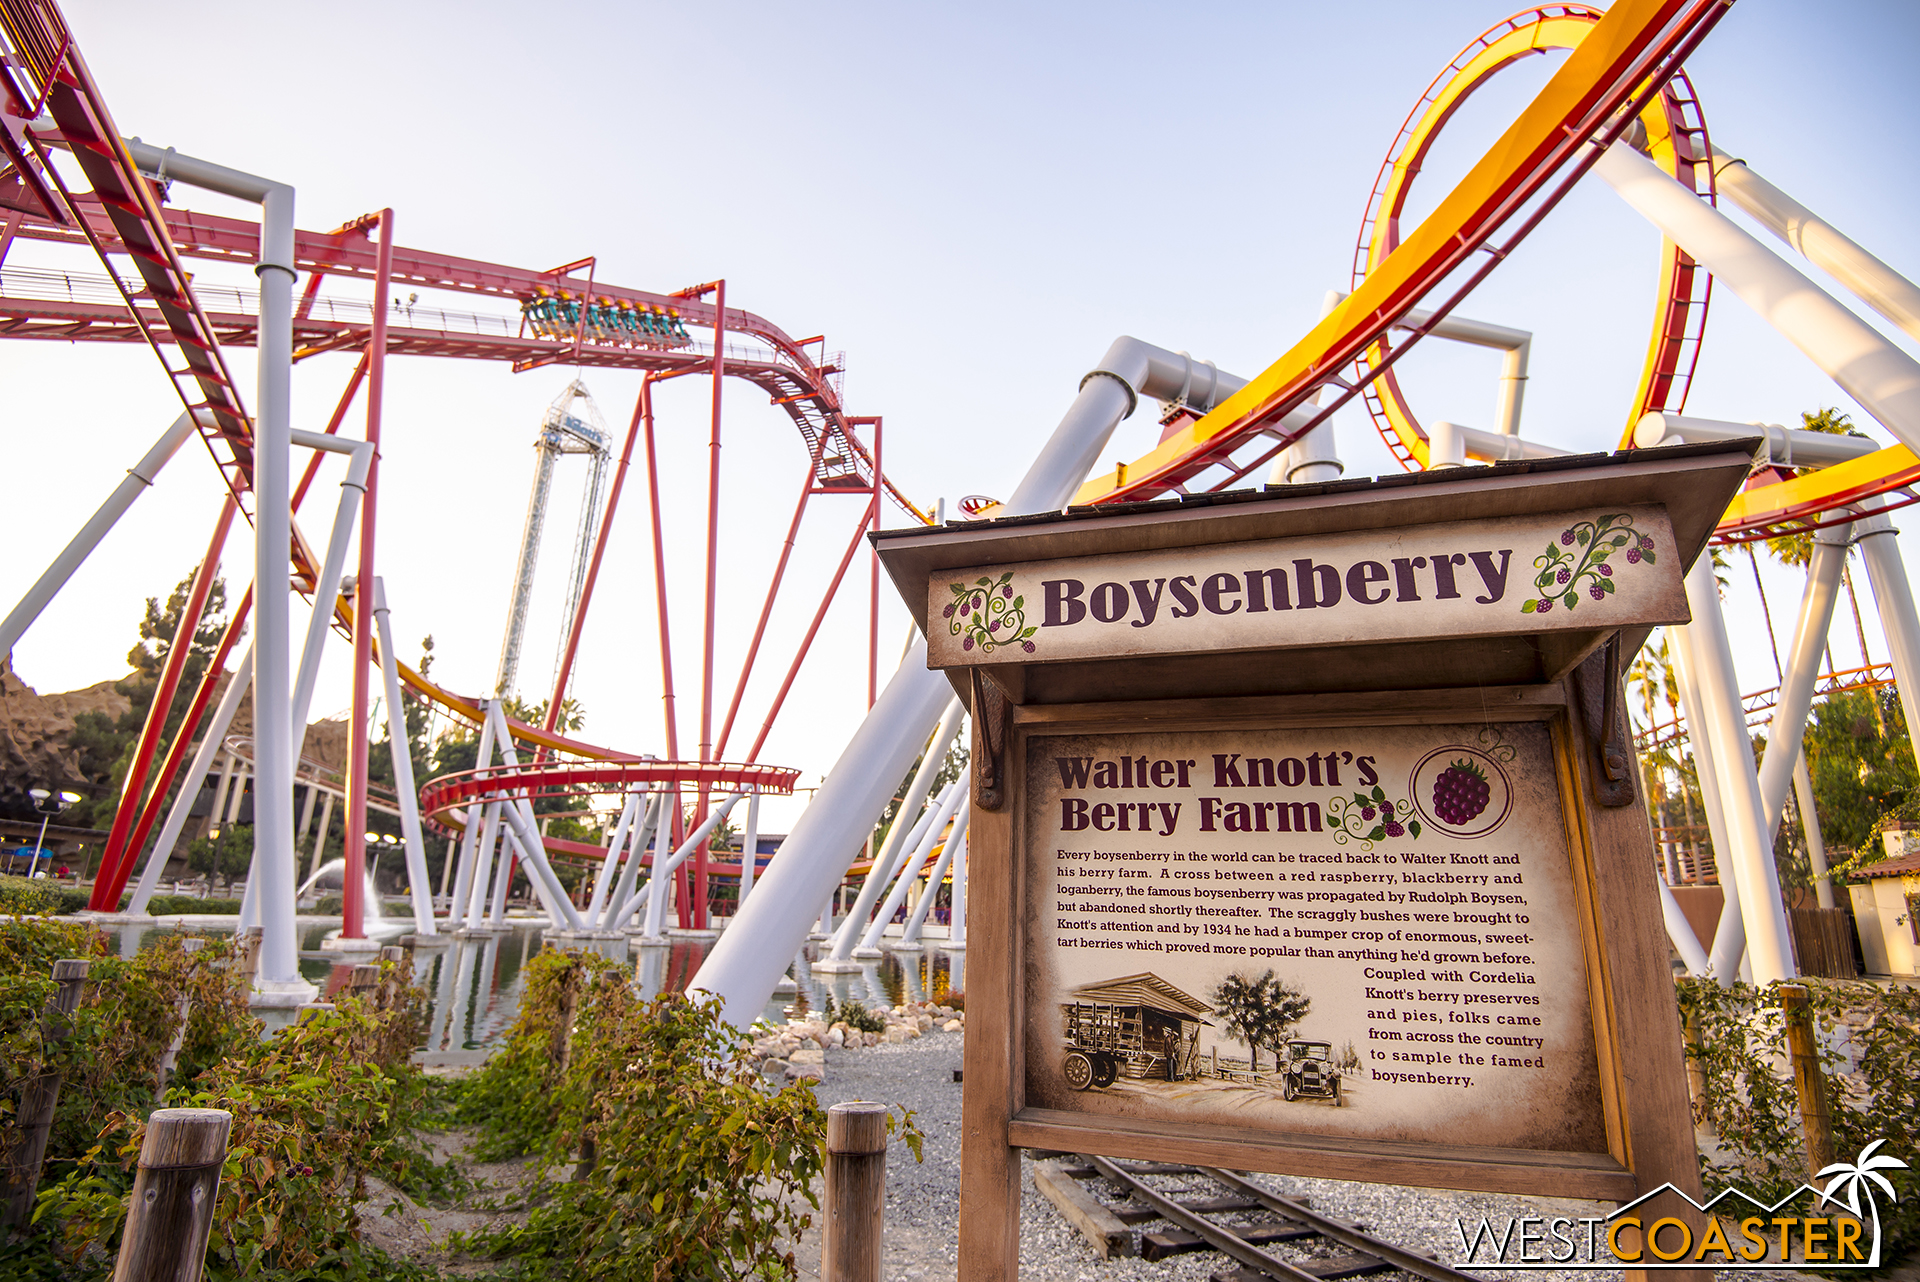  Over at Silver Bullet, they've planted some boysenberry vines. 